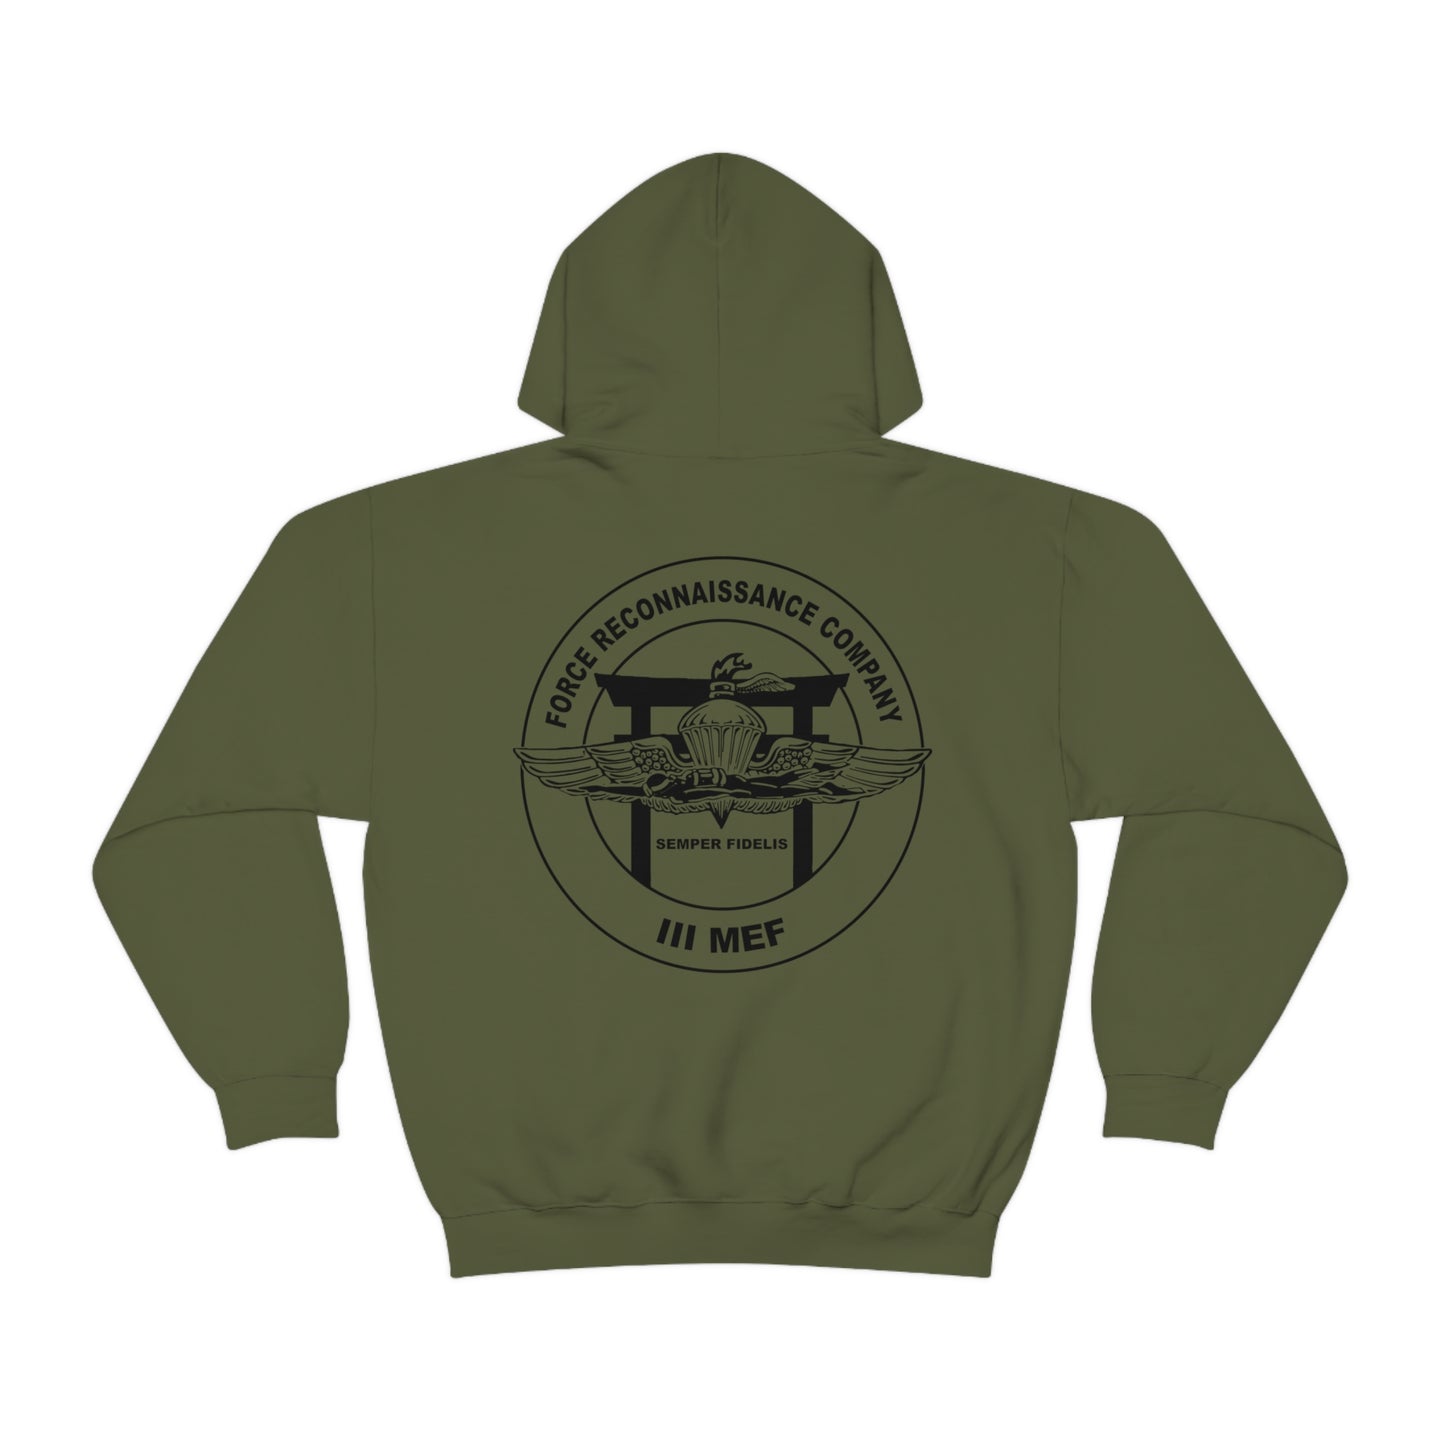 Military Green III MEF Force Recon Hoodie